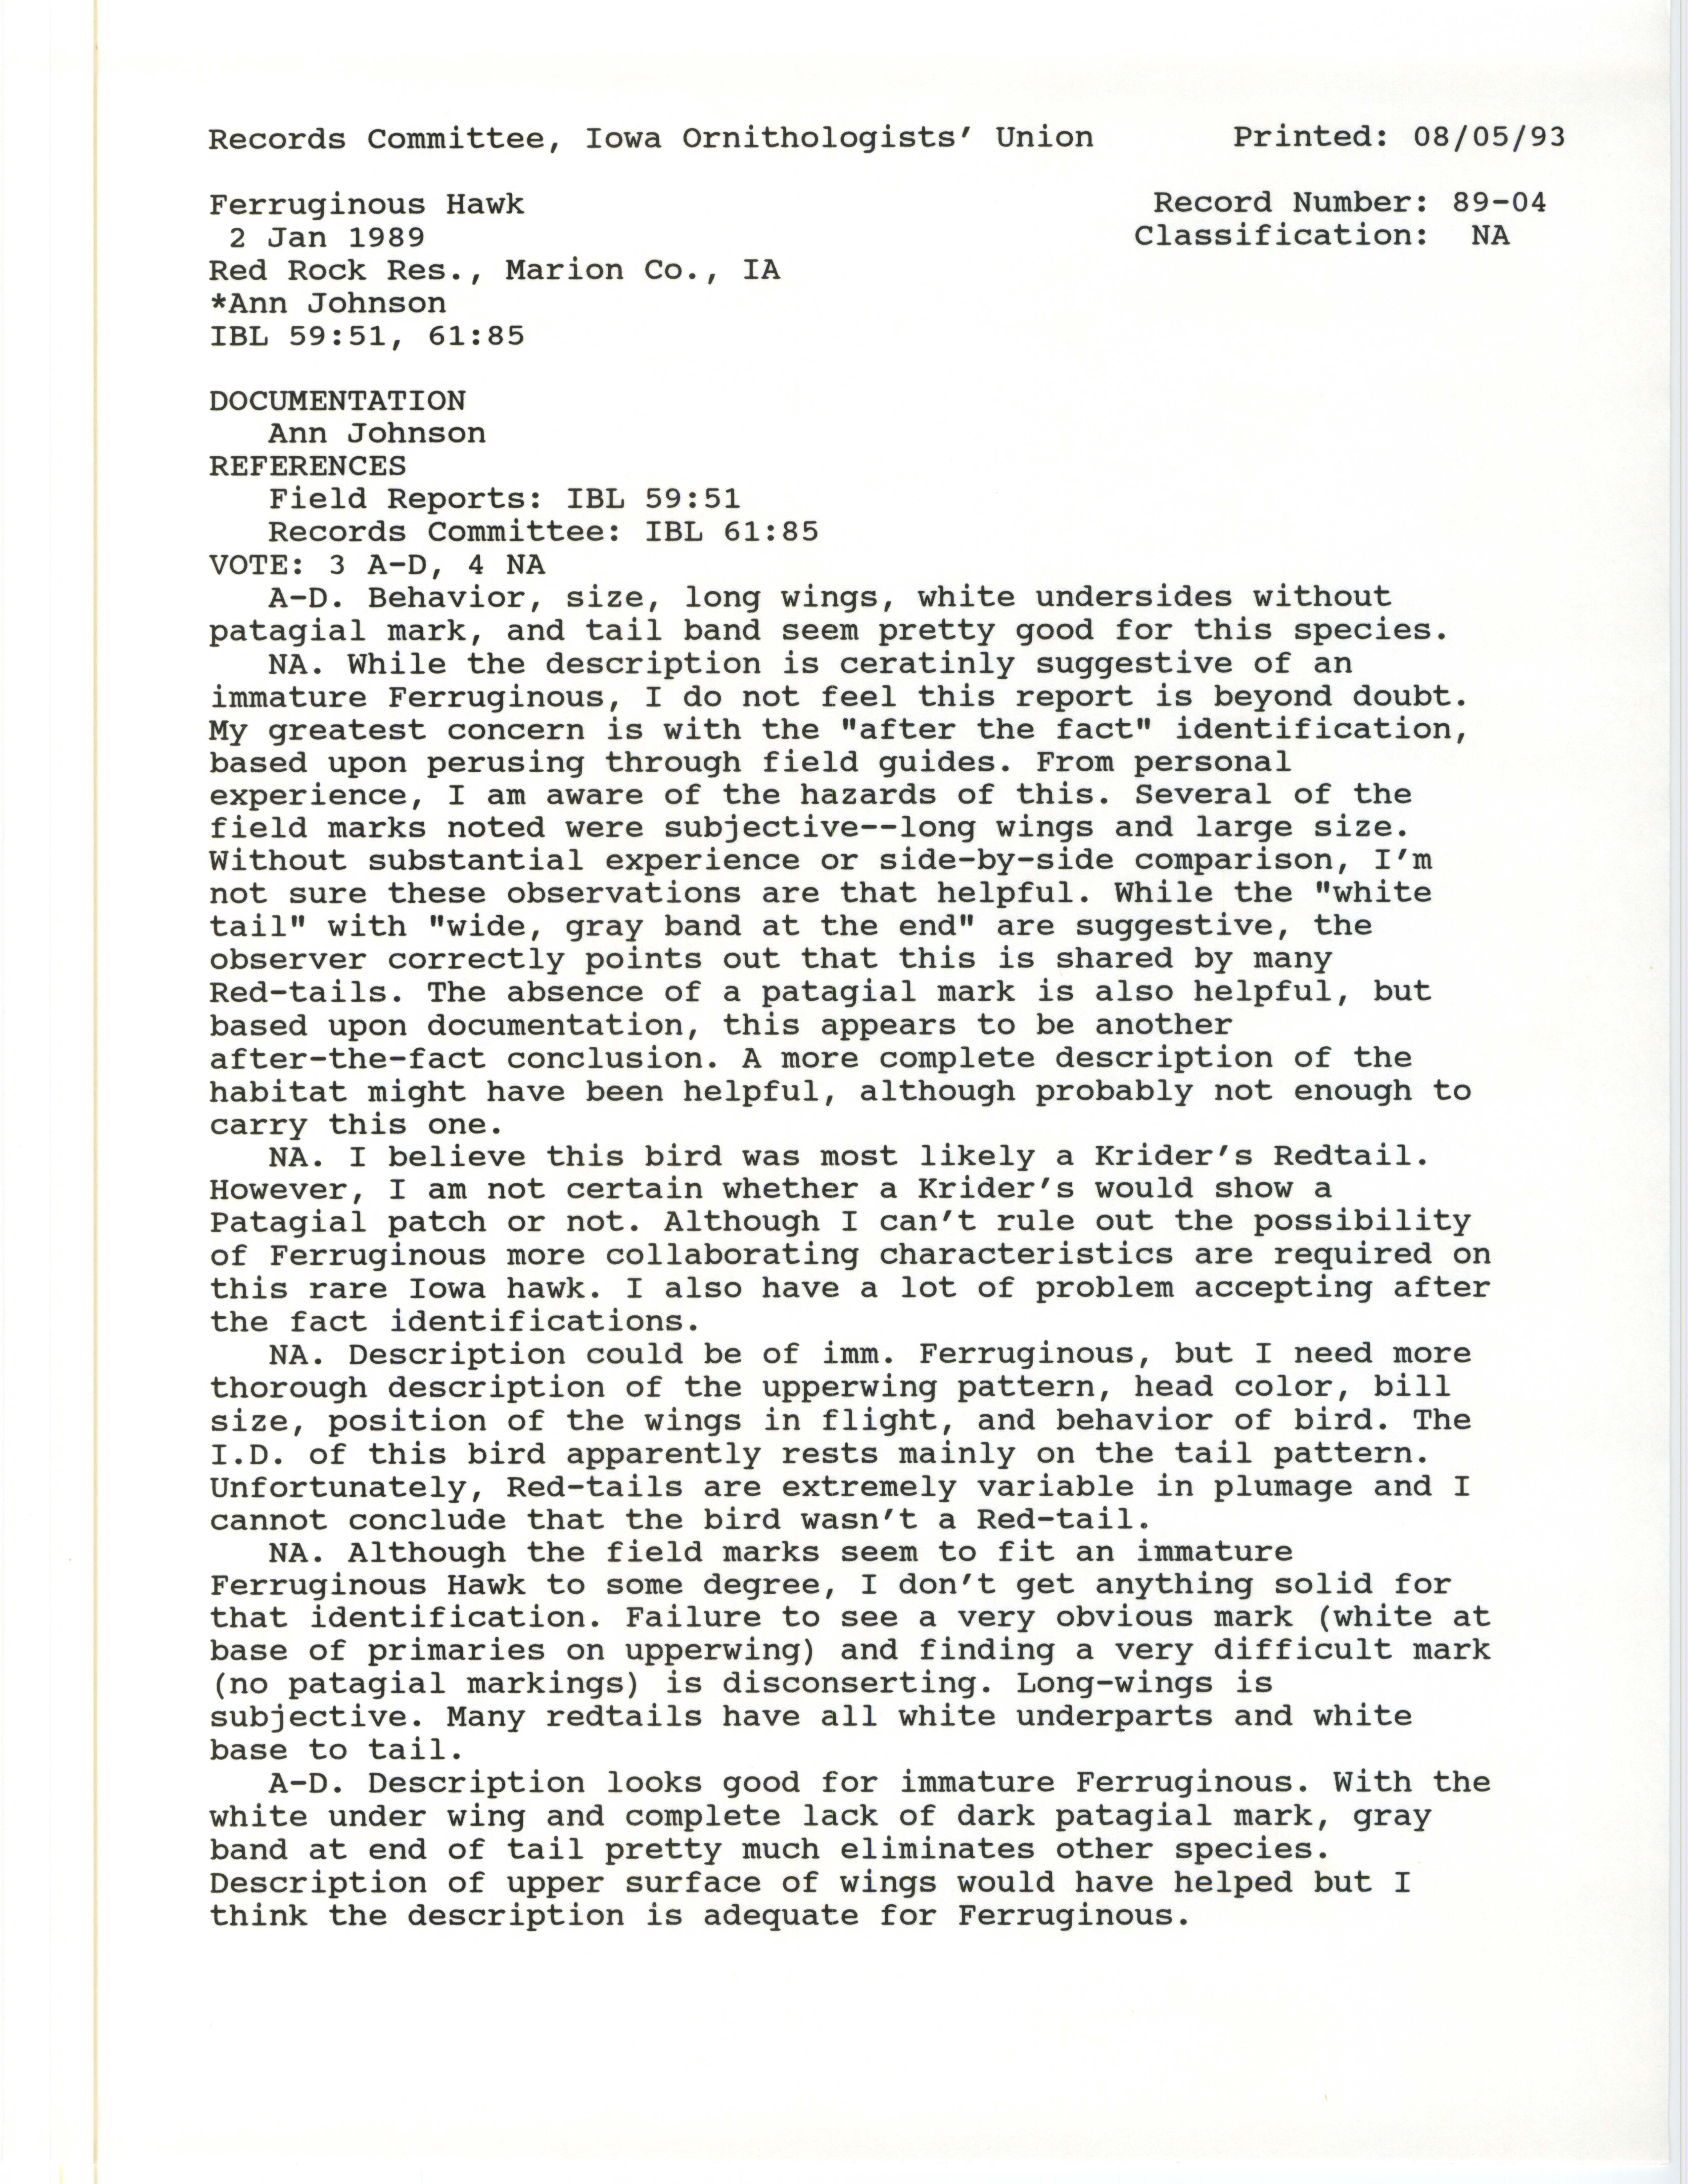 Records Committee review for rare bird sighting of Ferruginous Hawk at Red Rock Reservoir, 1989